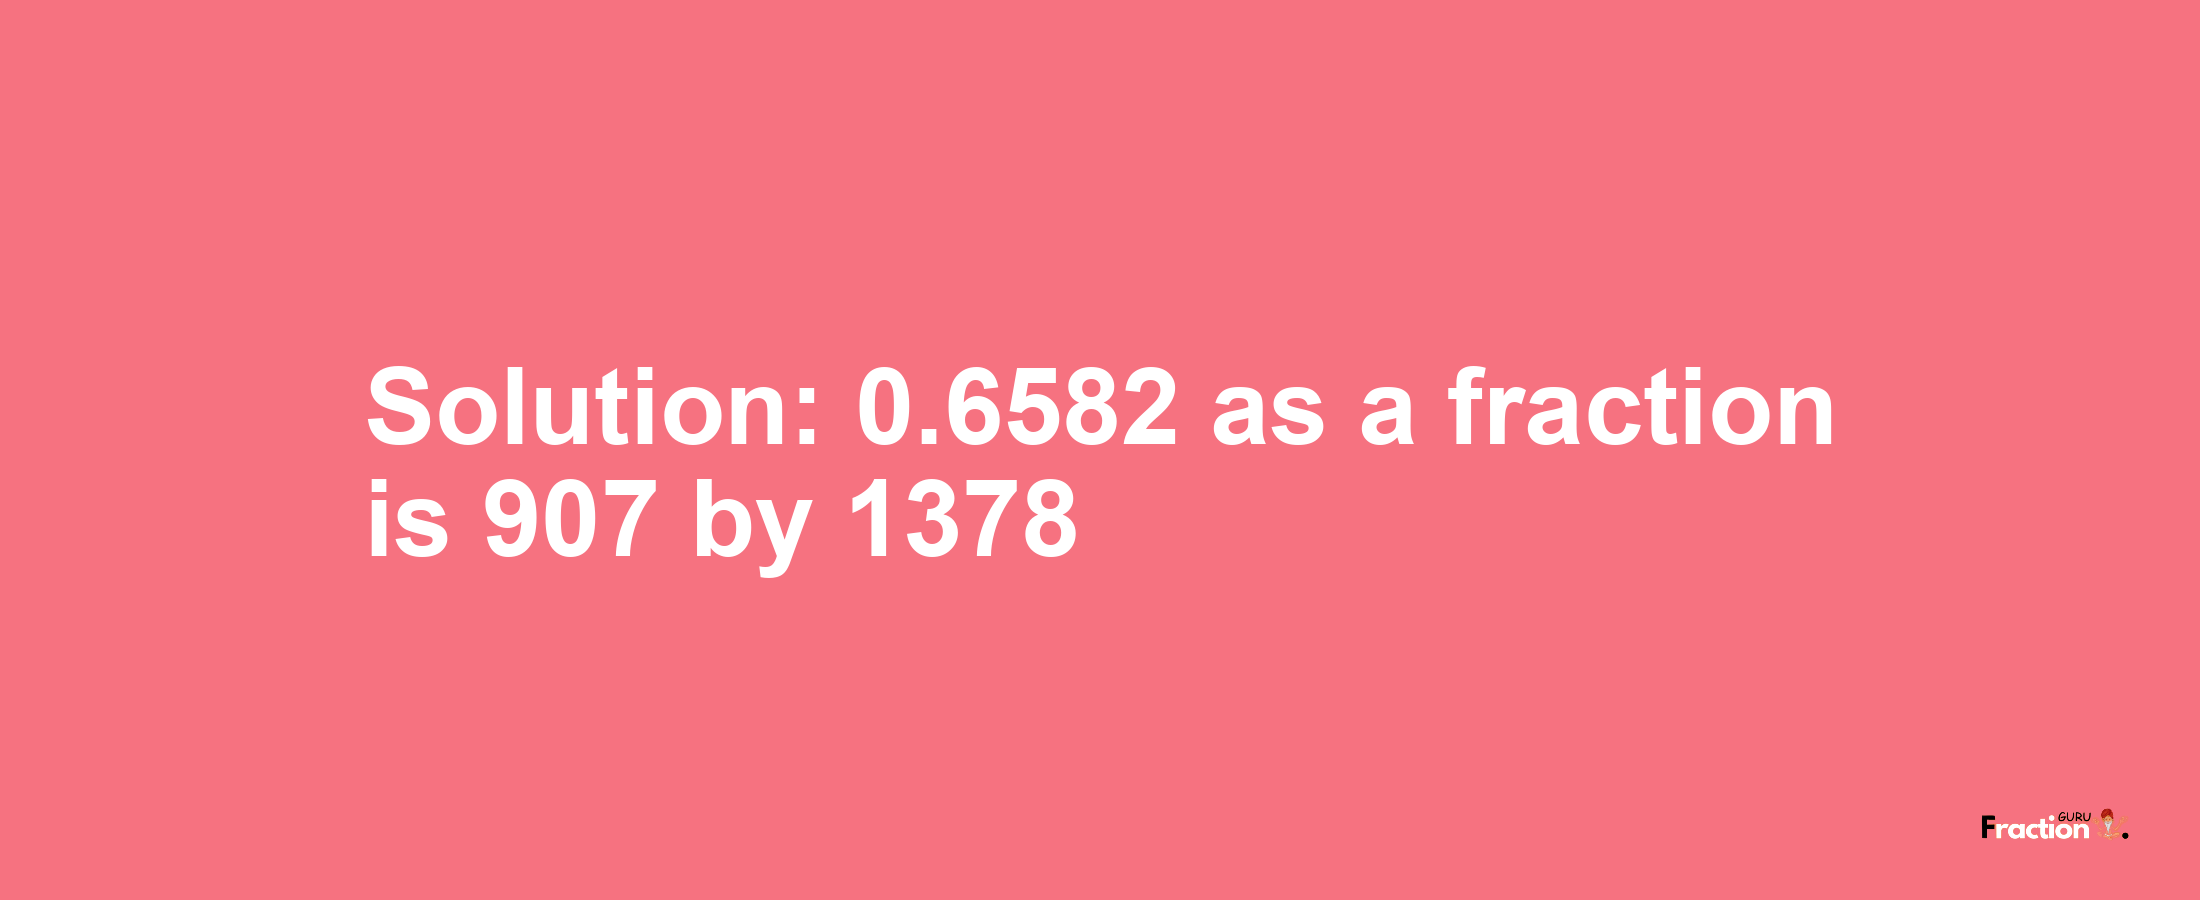 Solution:0.6582 as a fraction is 907/1378